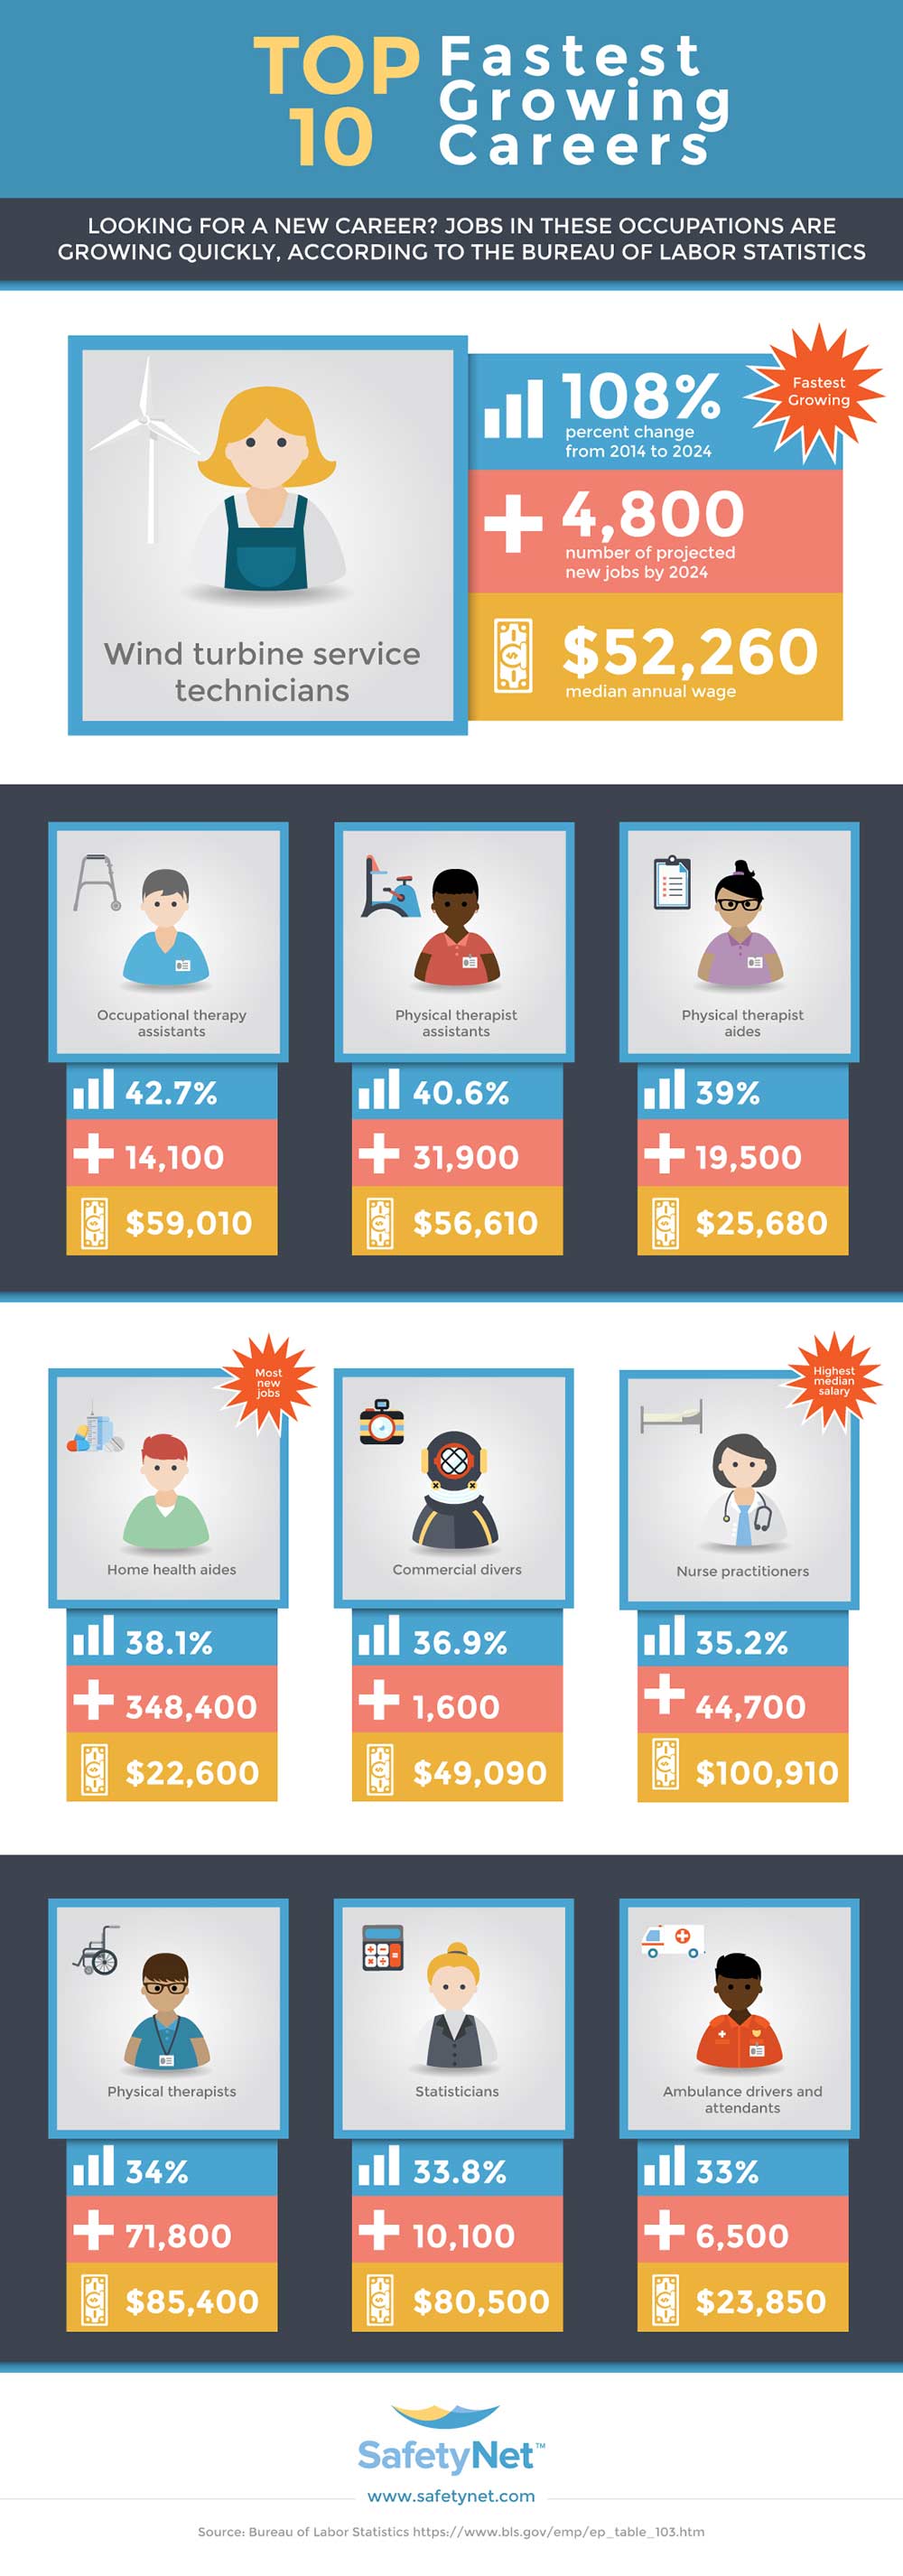 New Career Opportunities: Top 10 Fastest Growing Occupations - Infographic